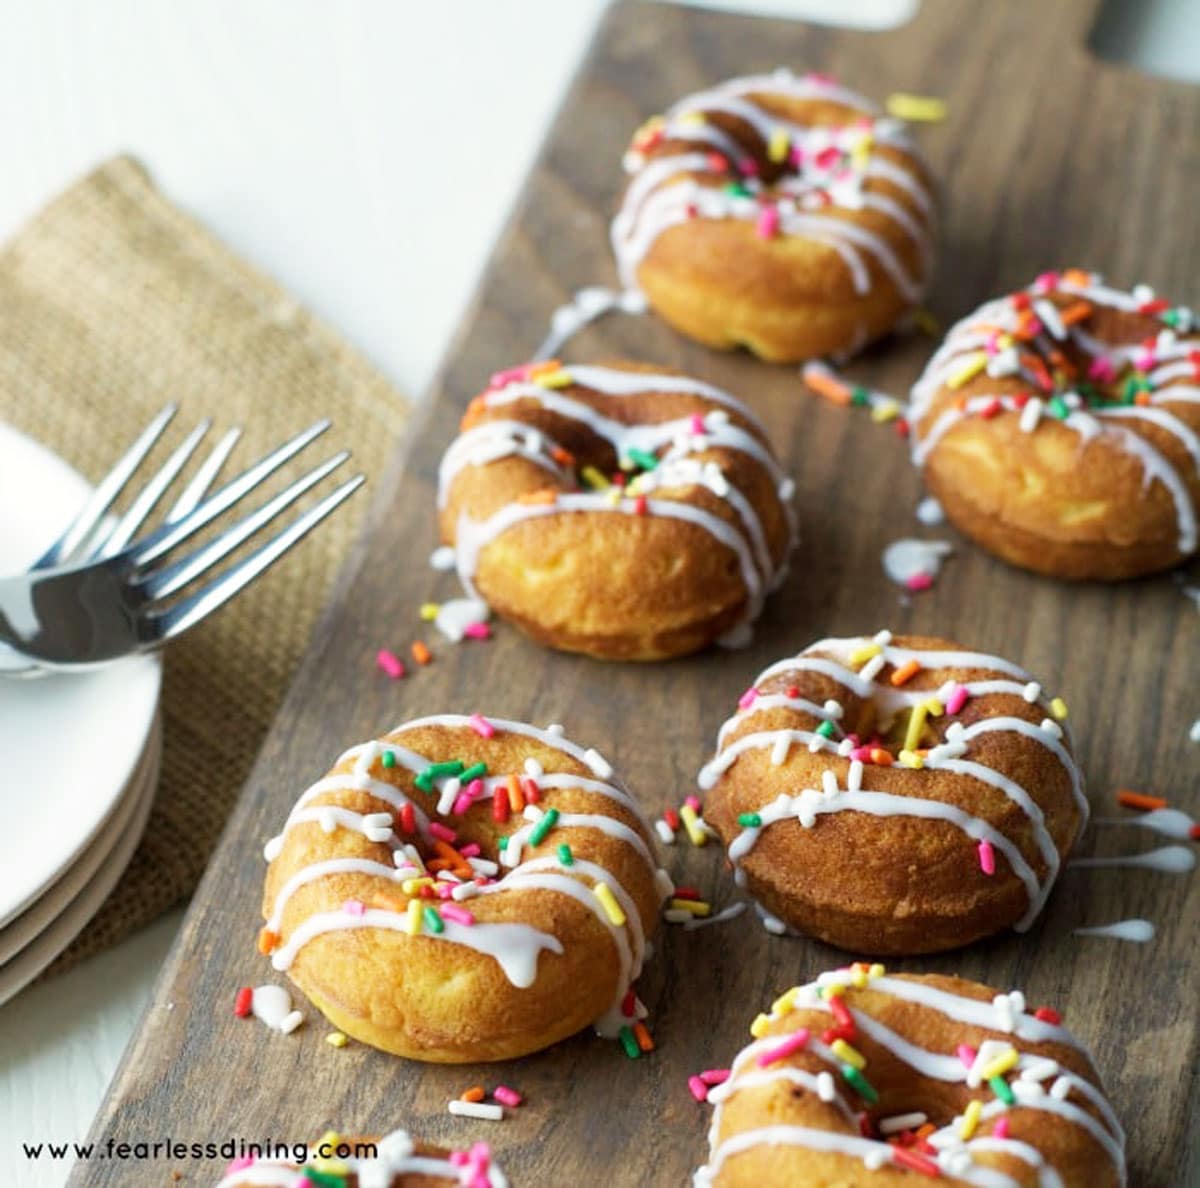 A close up of the decorated vanilla donuts.